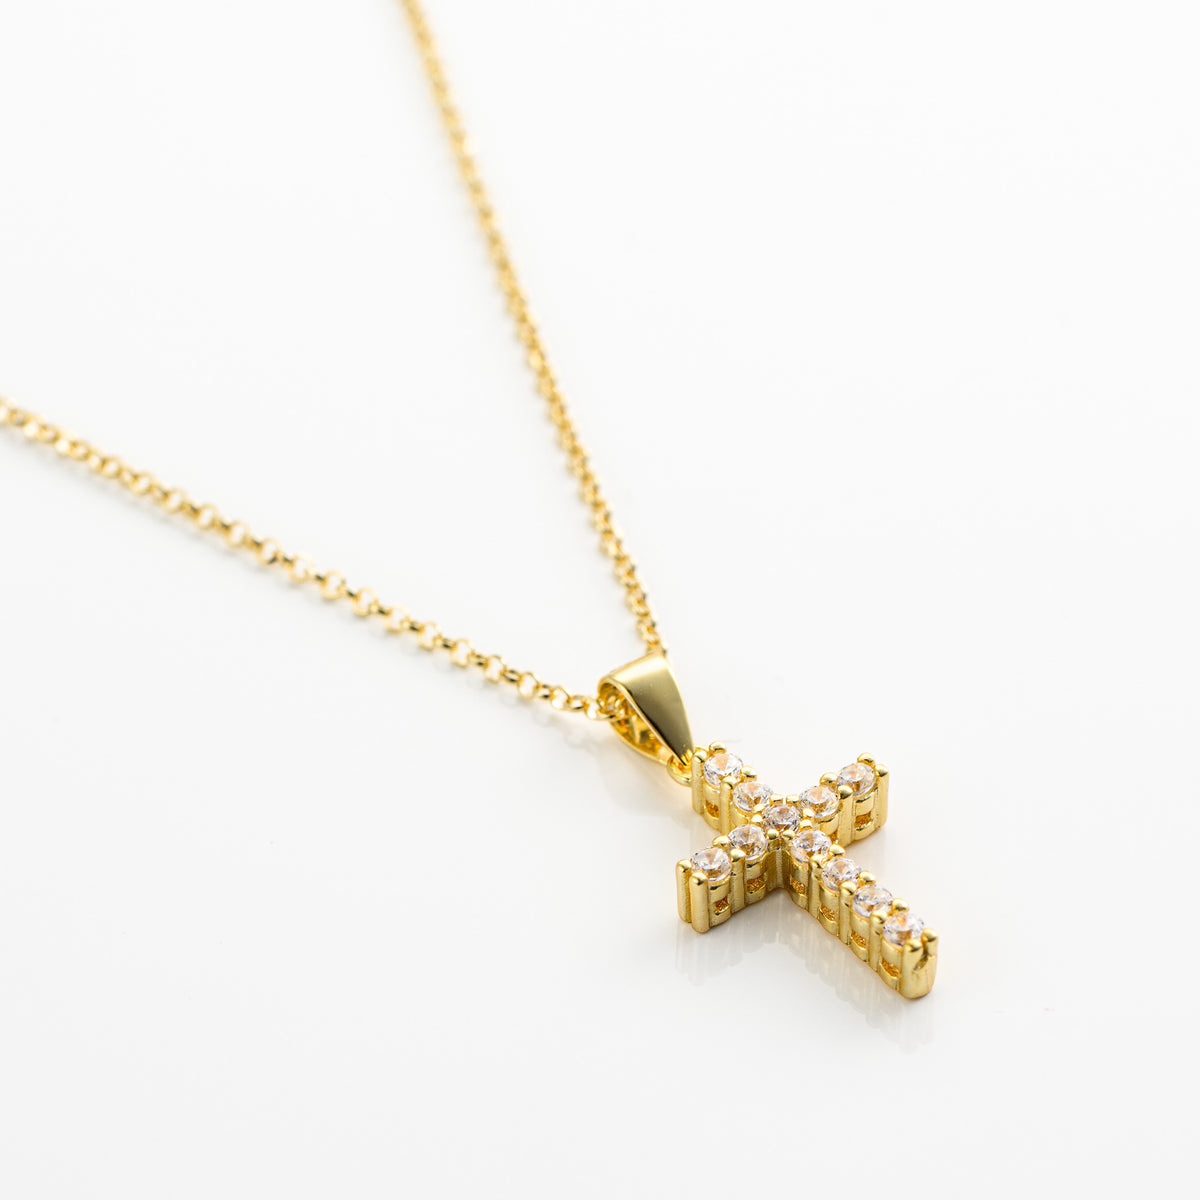 Silver small cross pendant necklace, gold plated